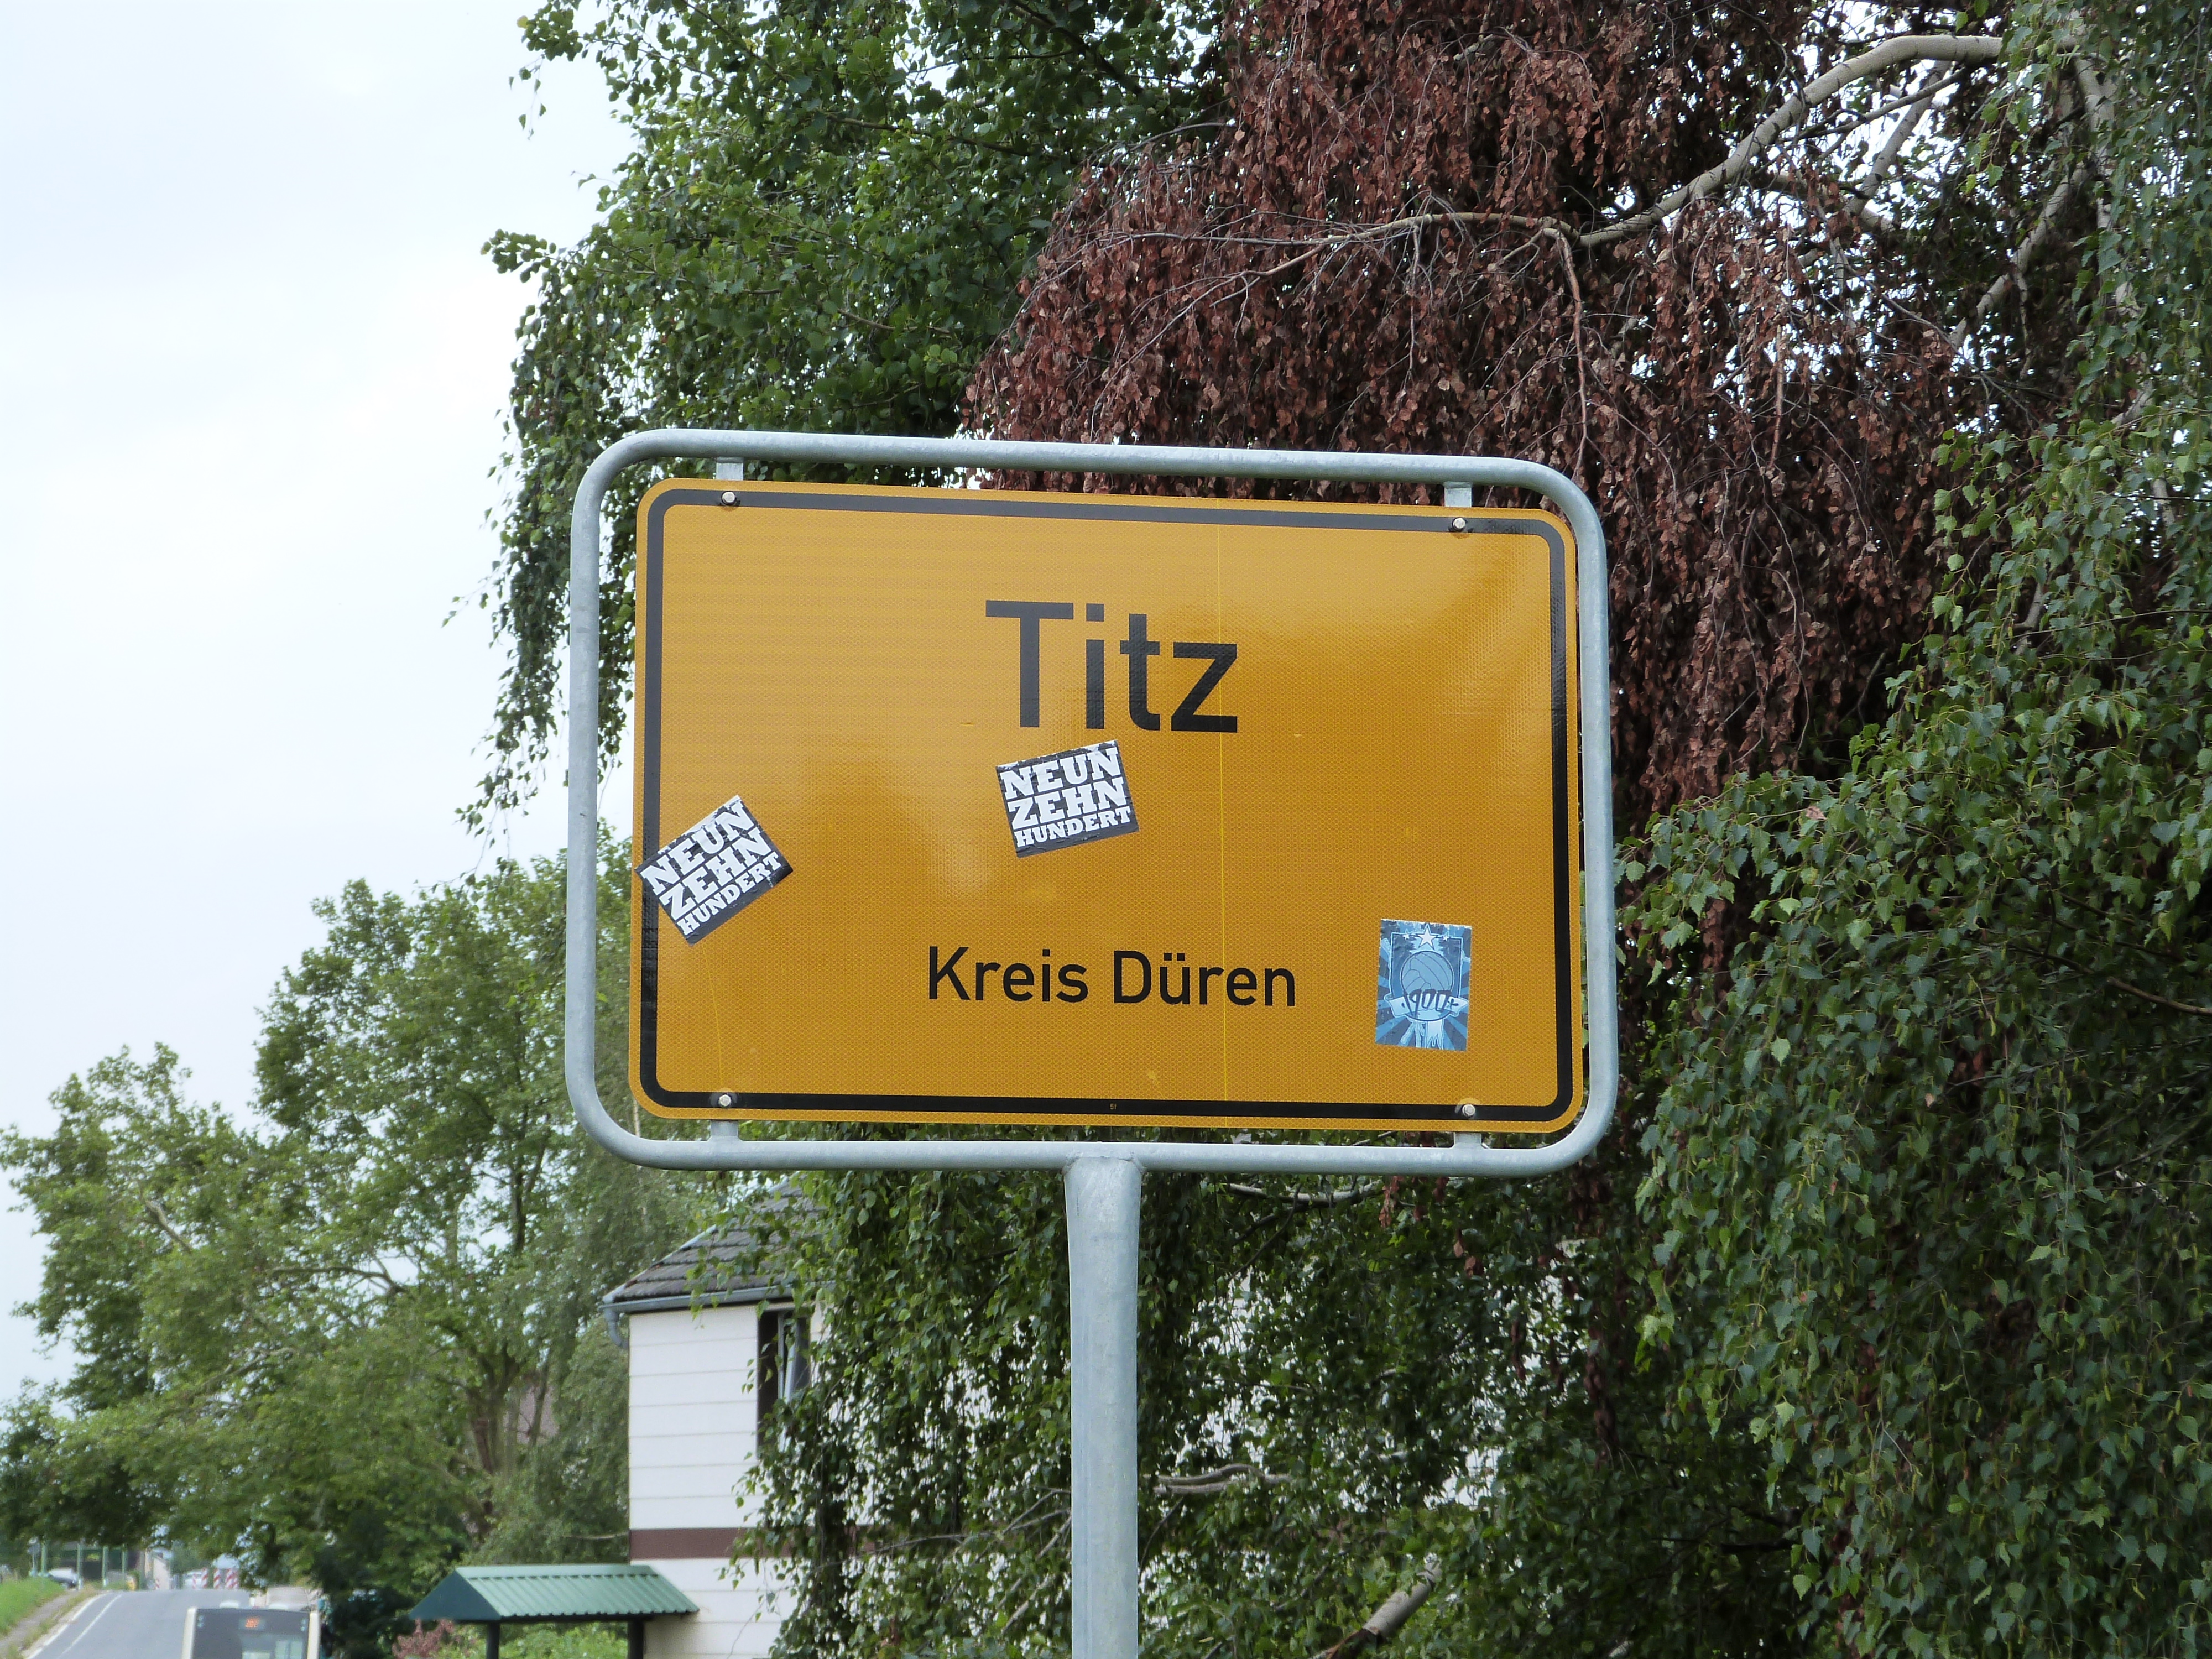 Funny place names: Titz, small town in Germany